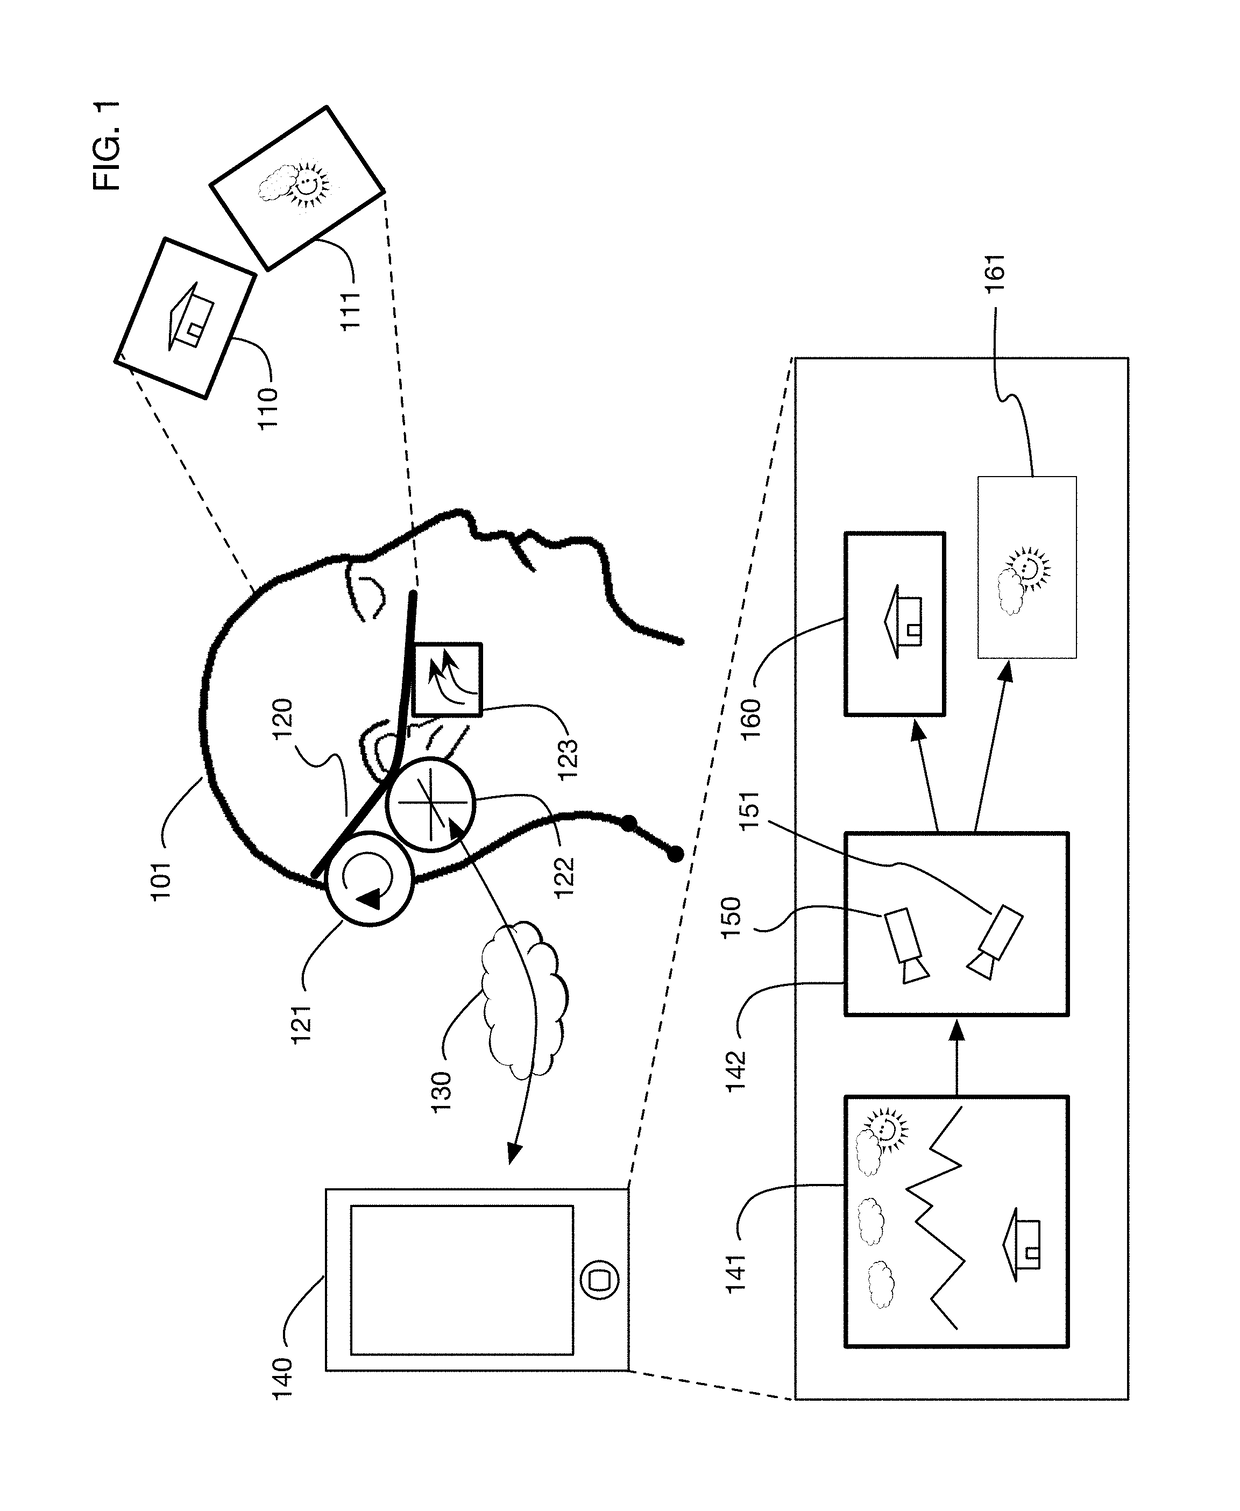 Predictive virtual reality display system with post rendering correction